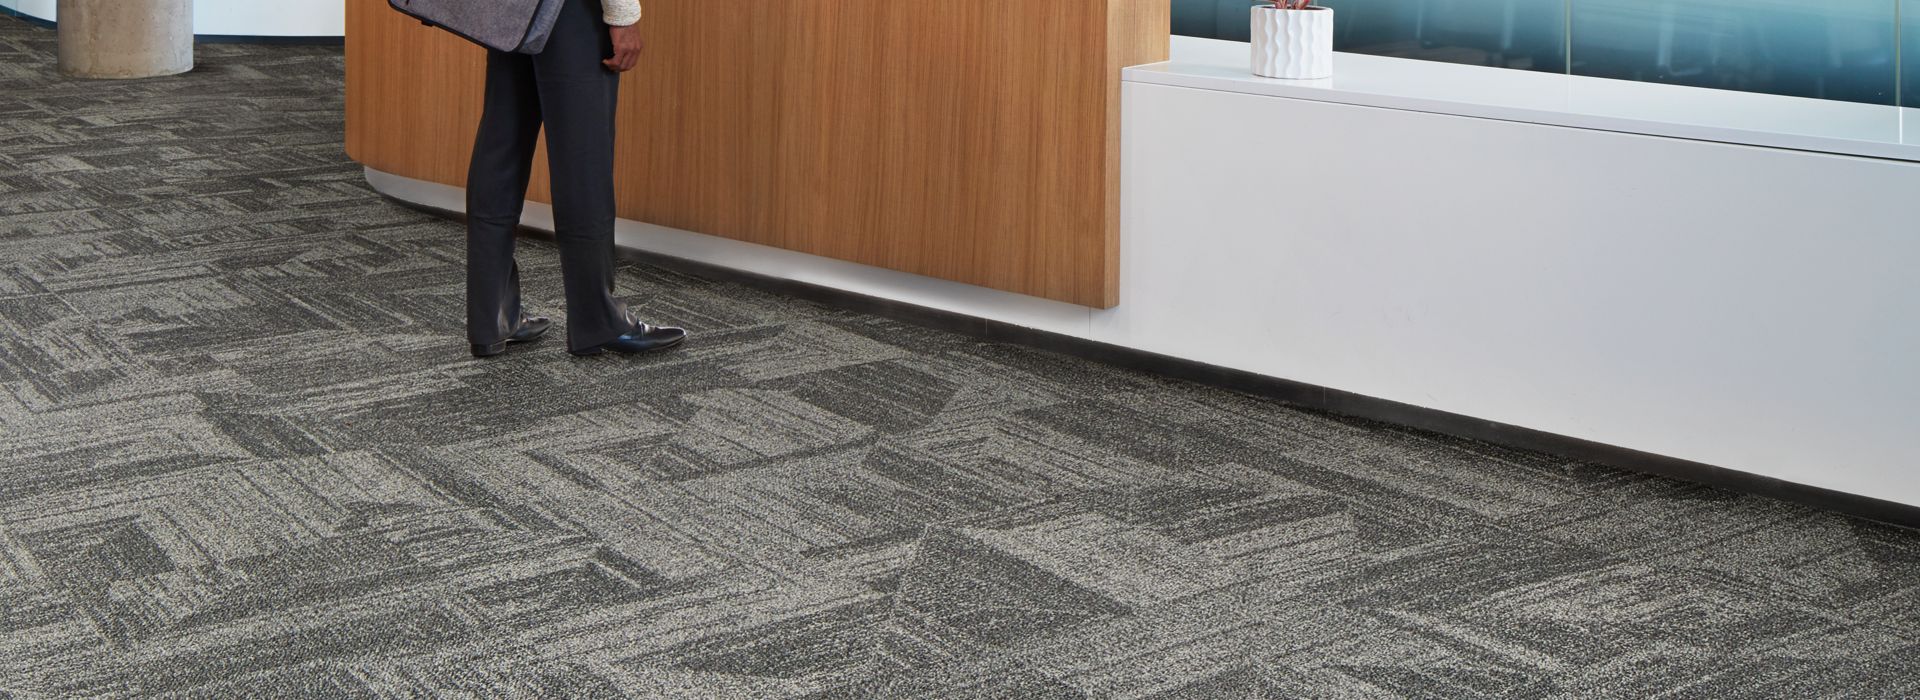 Interface Open Air 403 carpet tile in front desk area with man speaking with woman